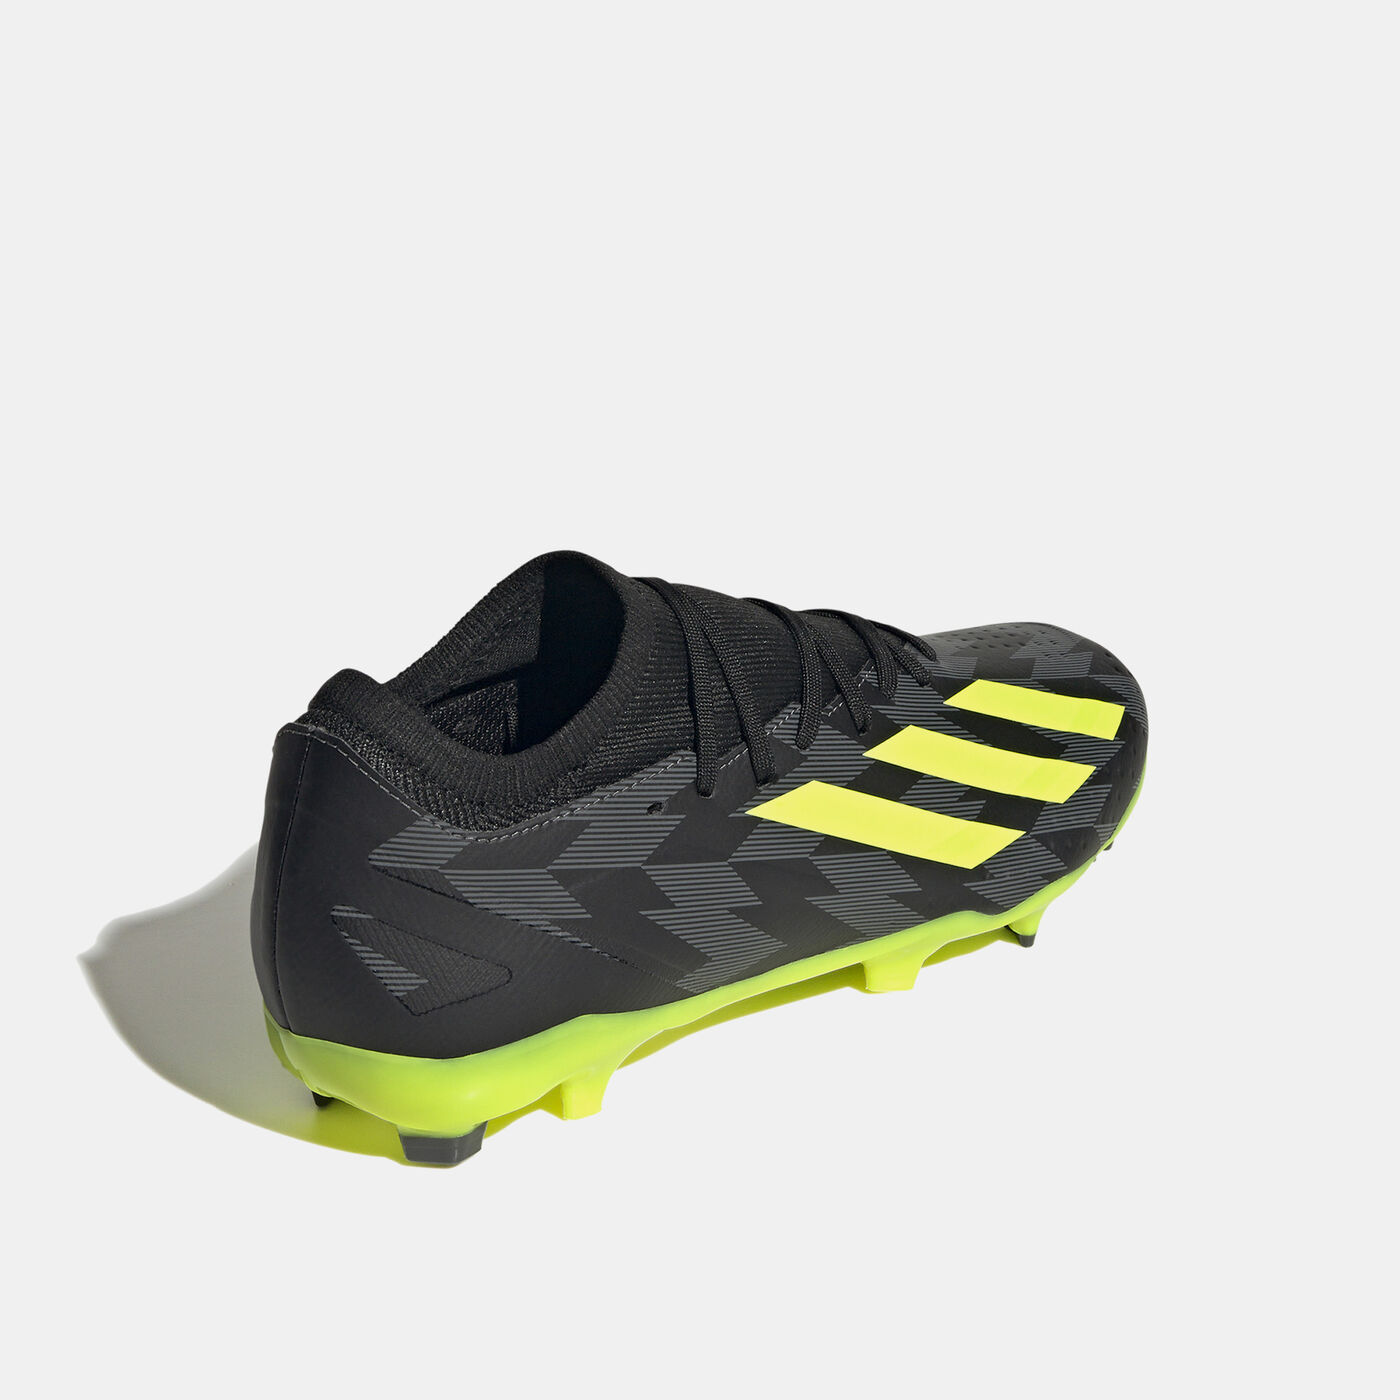 Men's X Crazyfast Injection.3 Firm Ground Football Shoes